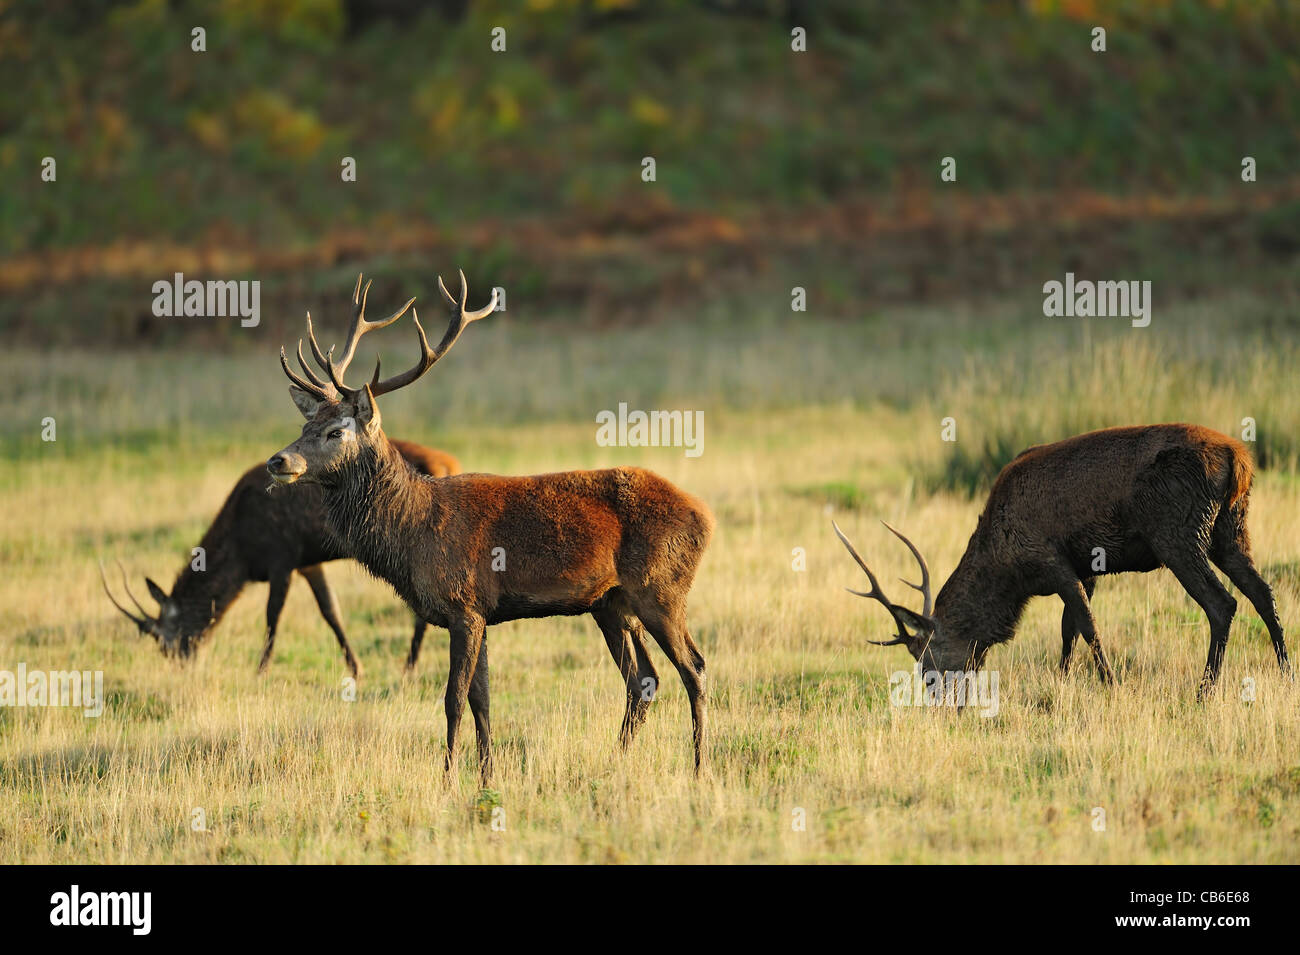 3 young red deer stags in a field Stock Photo